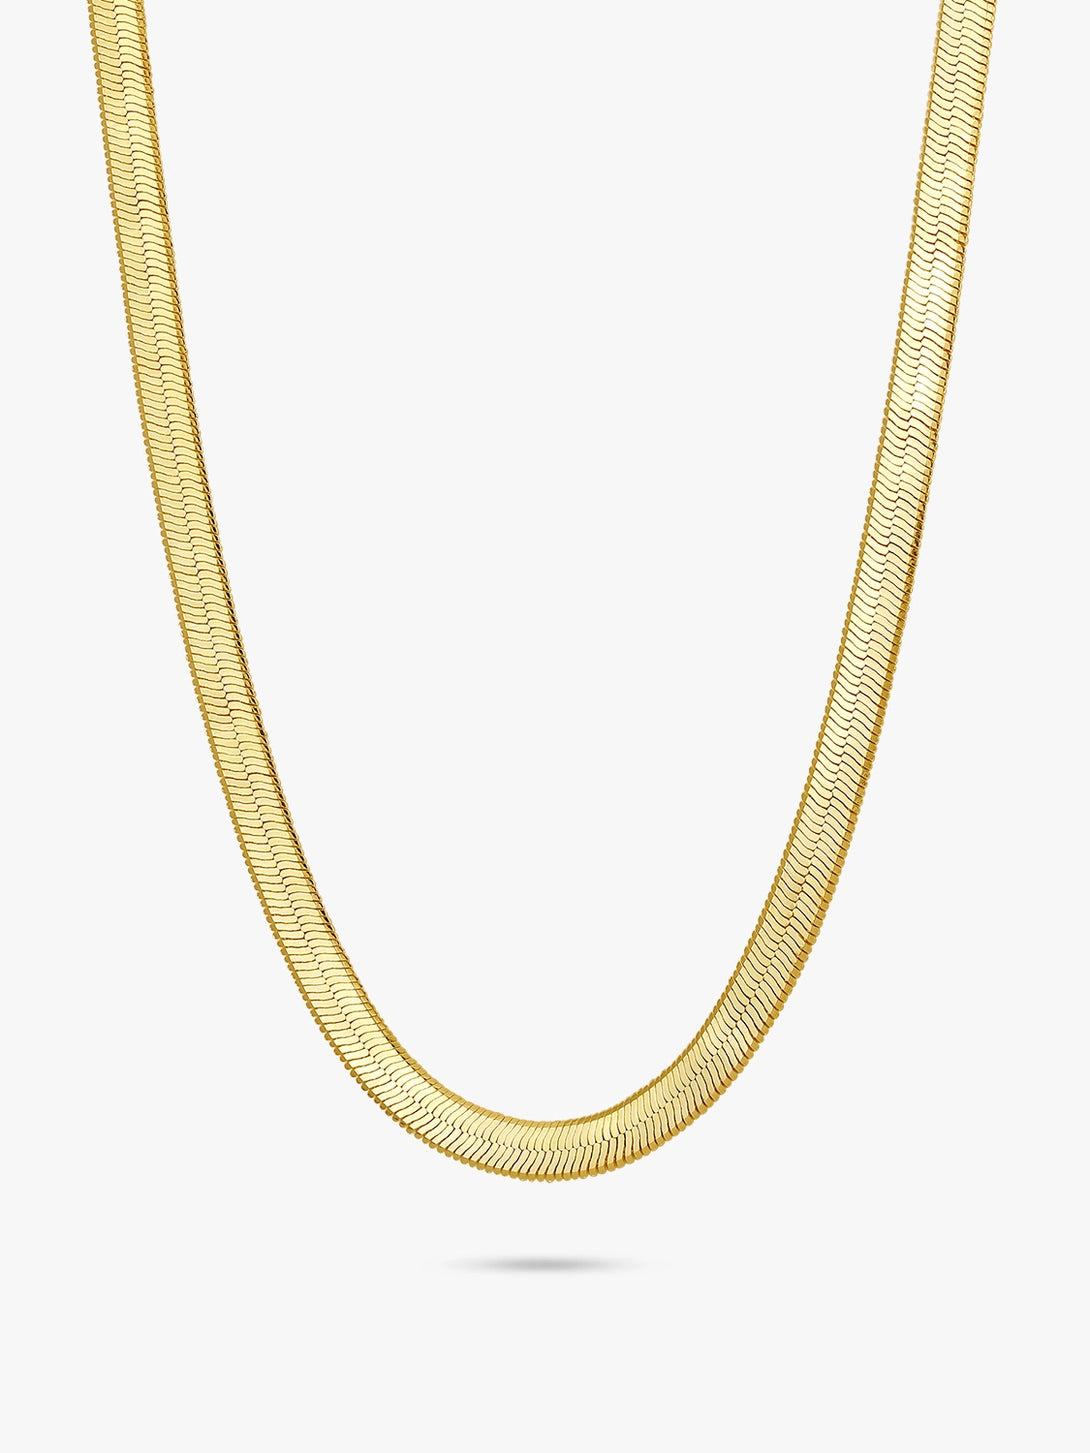 Unisex Snake Chain Necklace - OOTDY